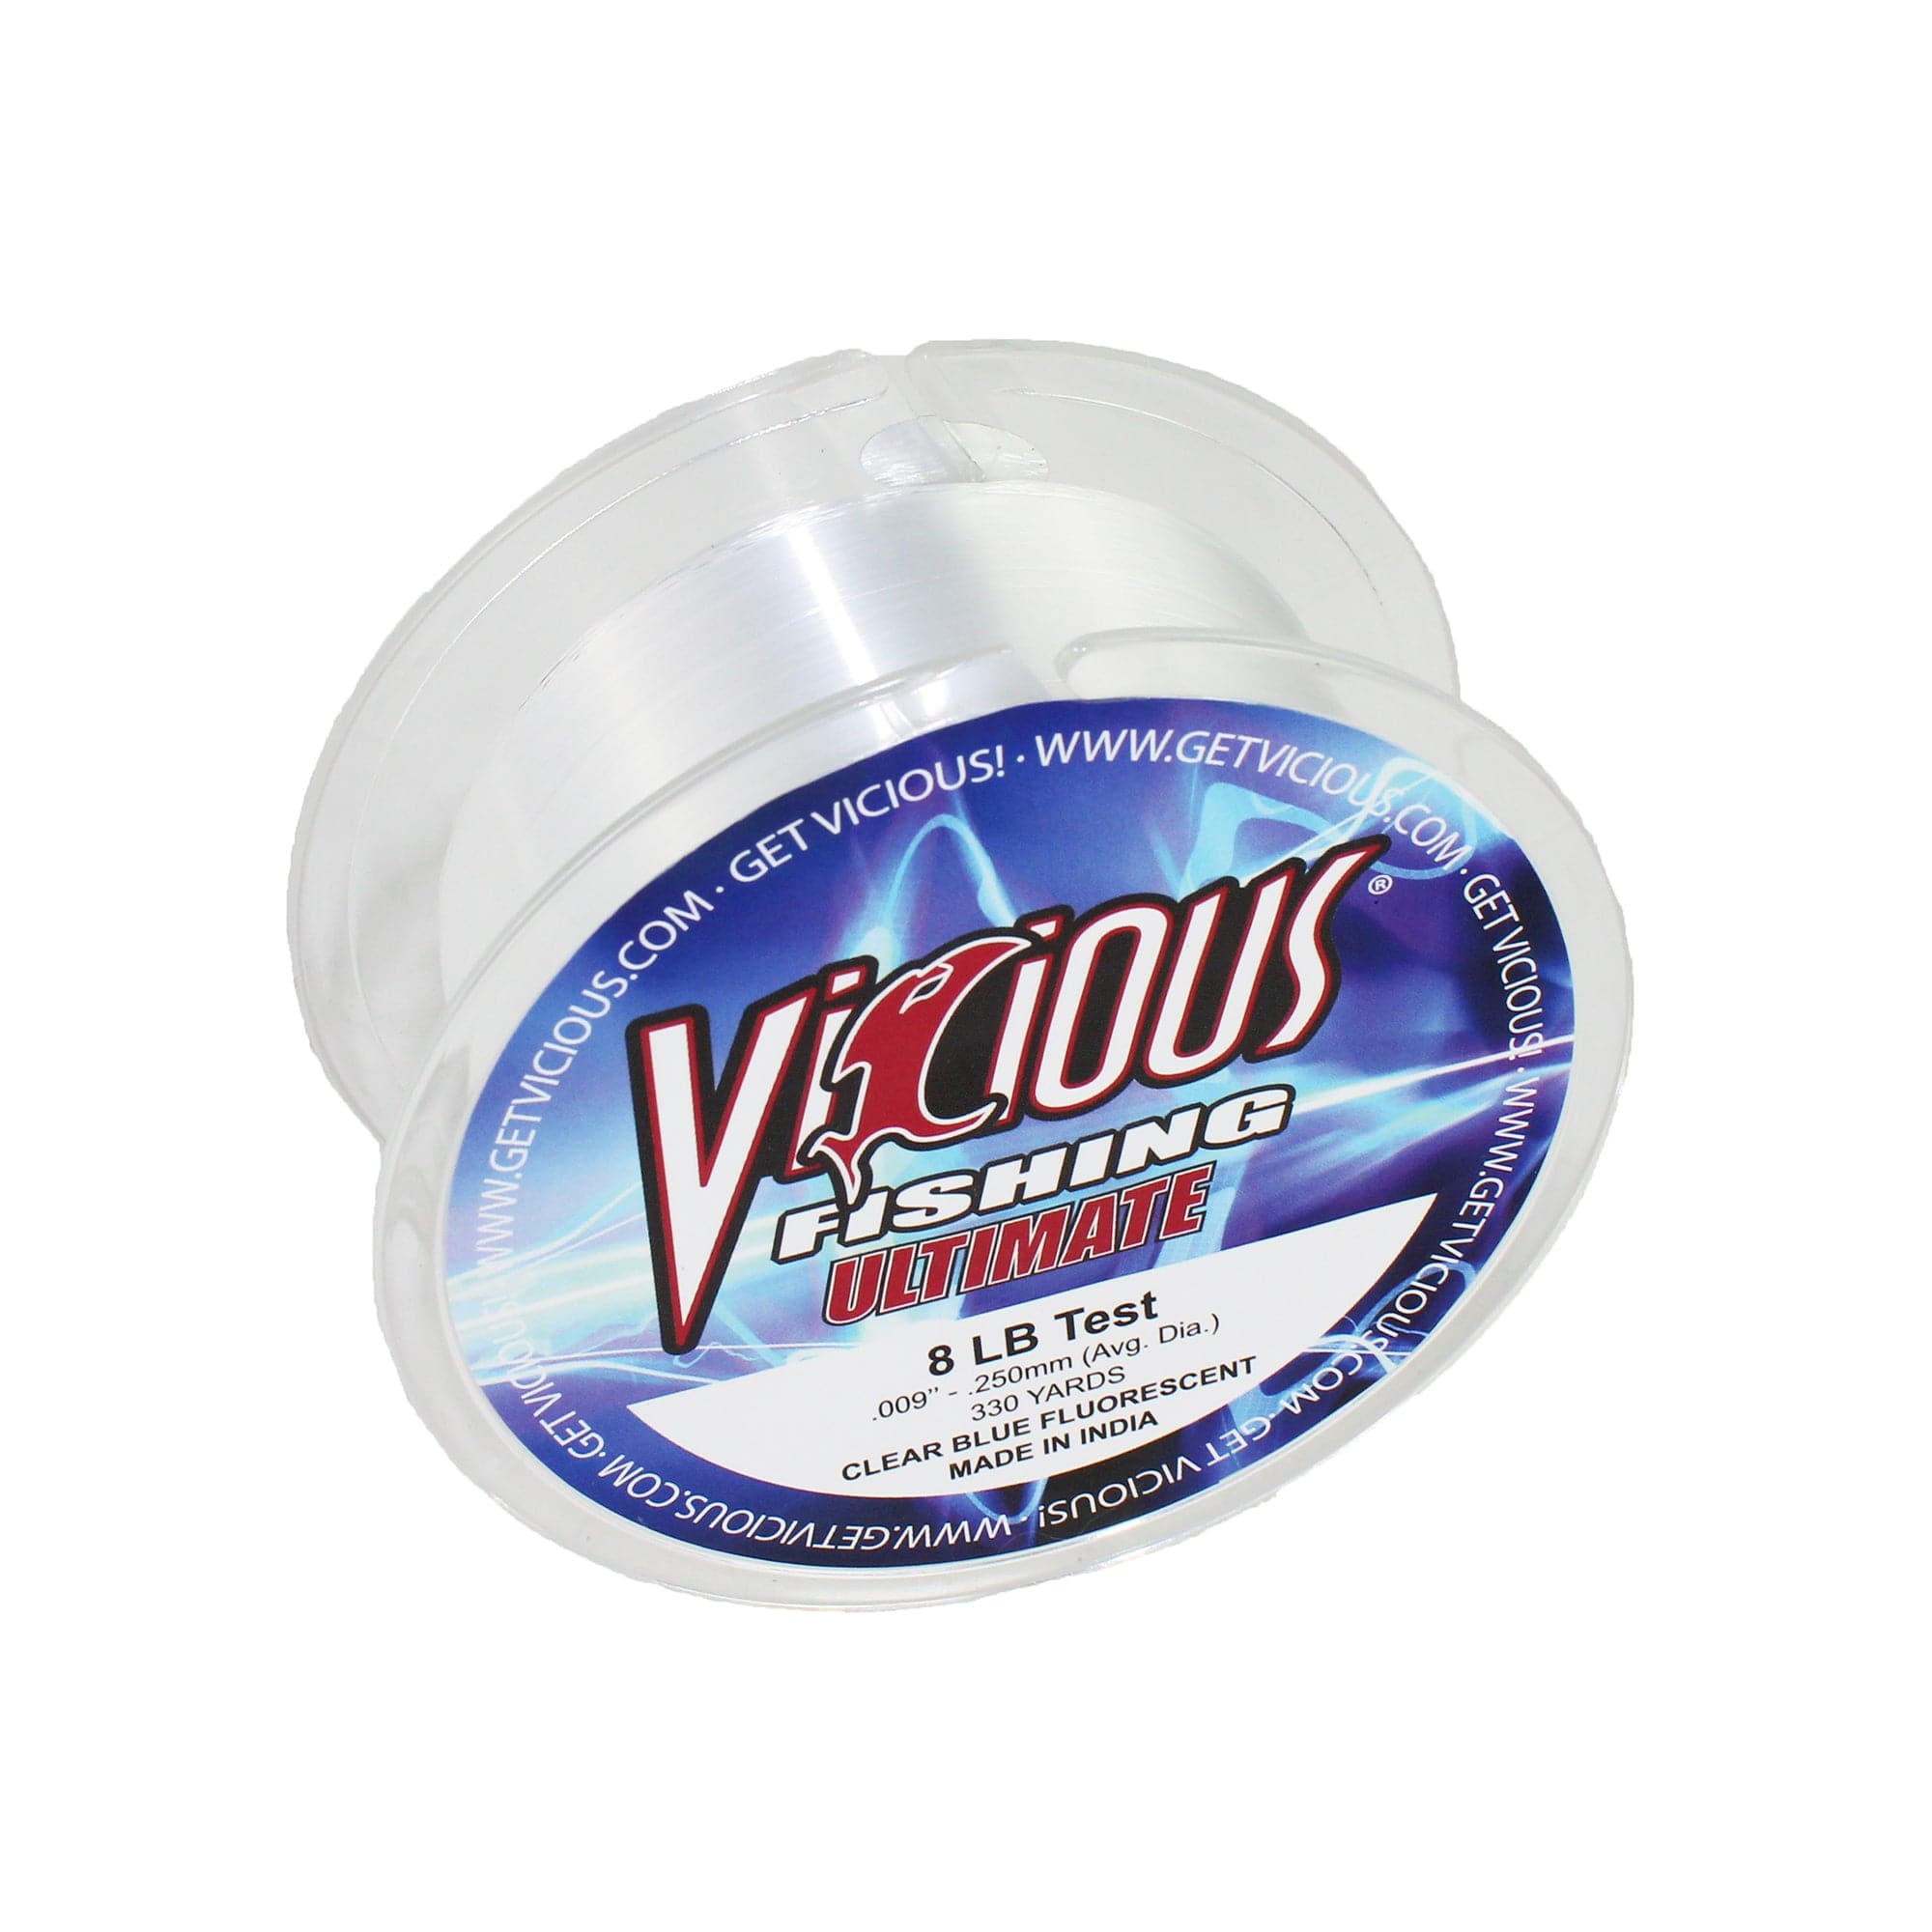 Vicious Fishing VCB Ultimate Monofilament Fishing Line, Clear Blue - 3